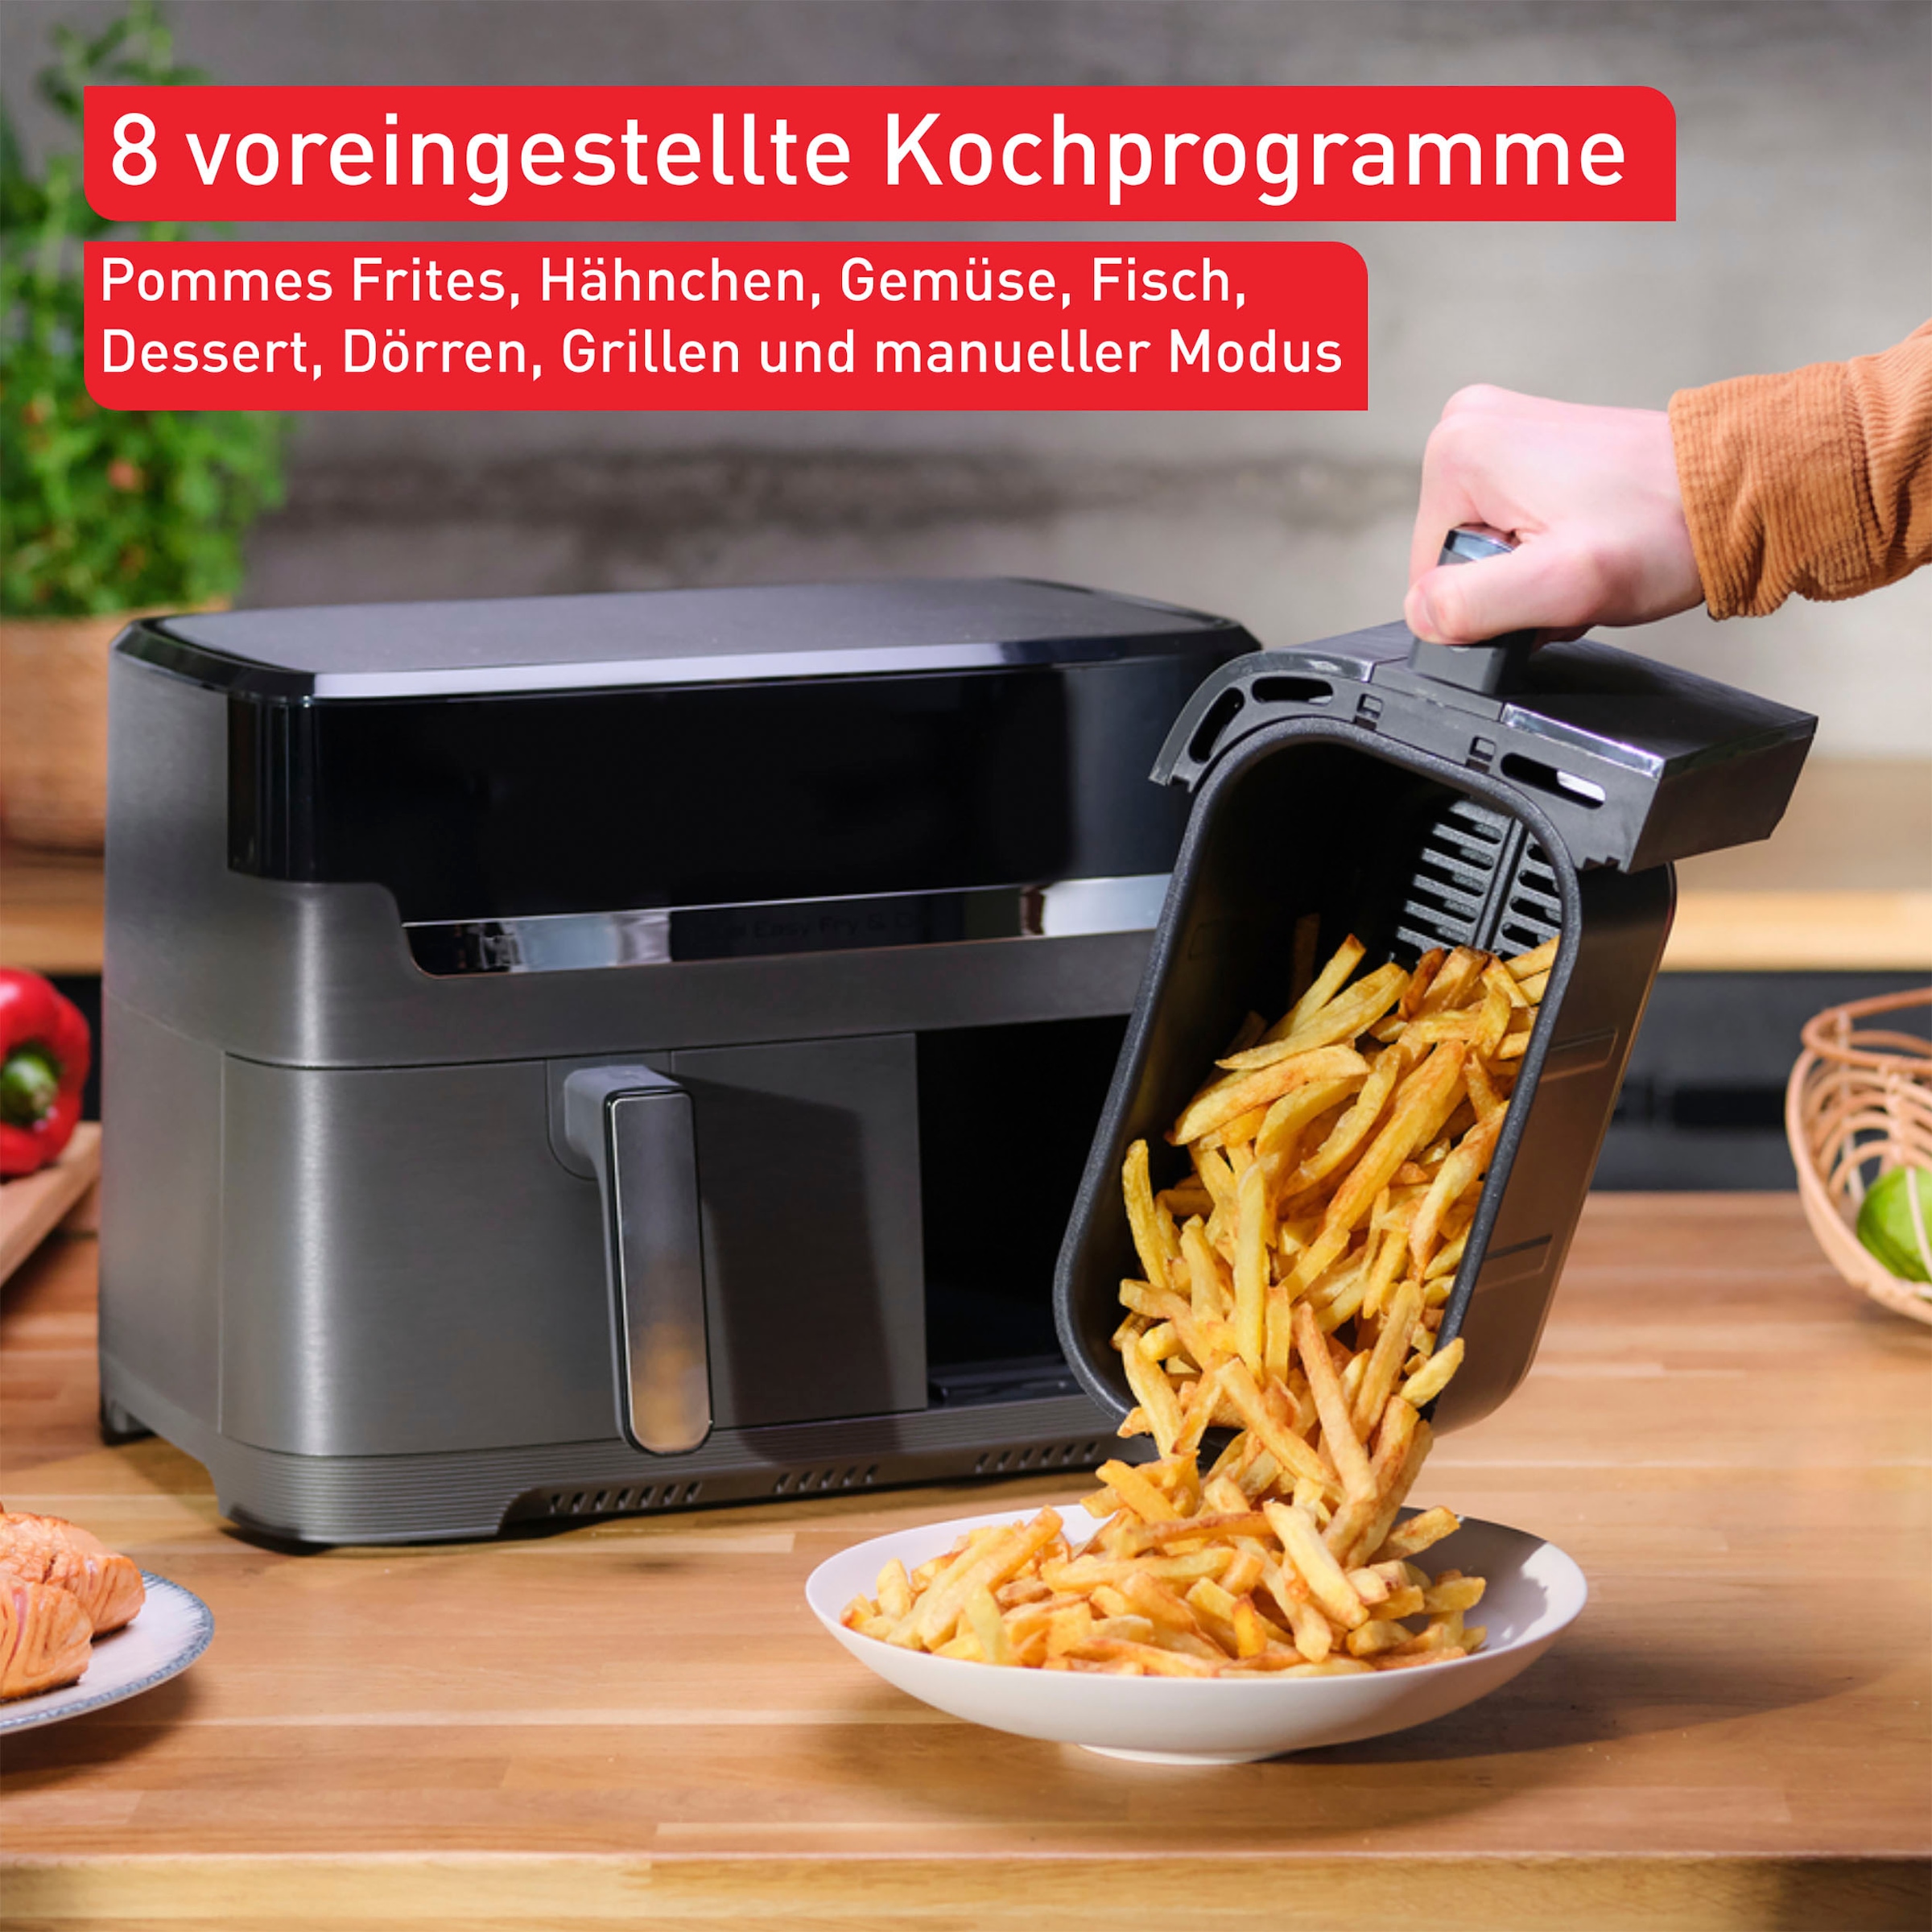 FRITEUSE A AIR DUAL EASY FRY & GRILL 8,3 L